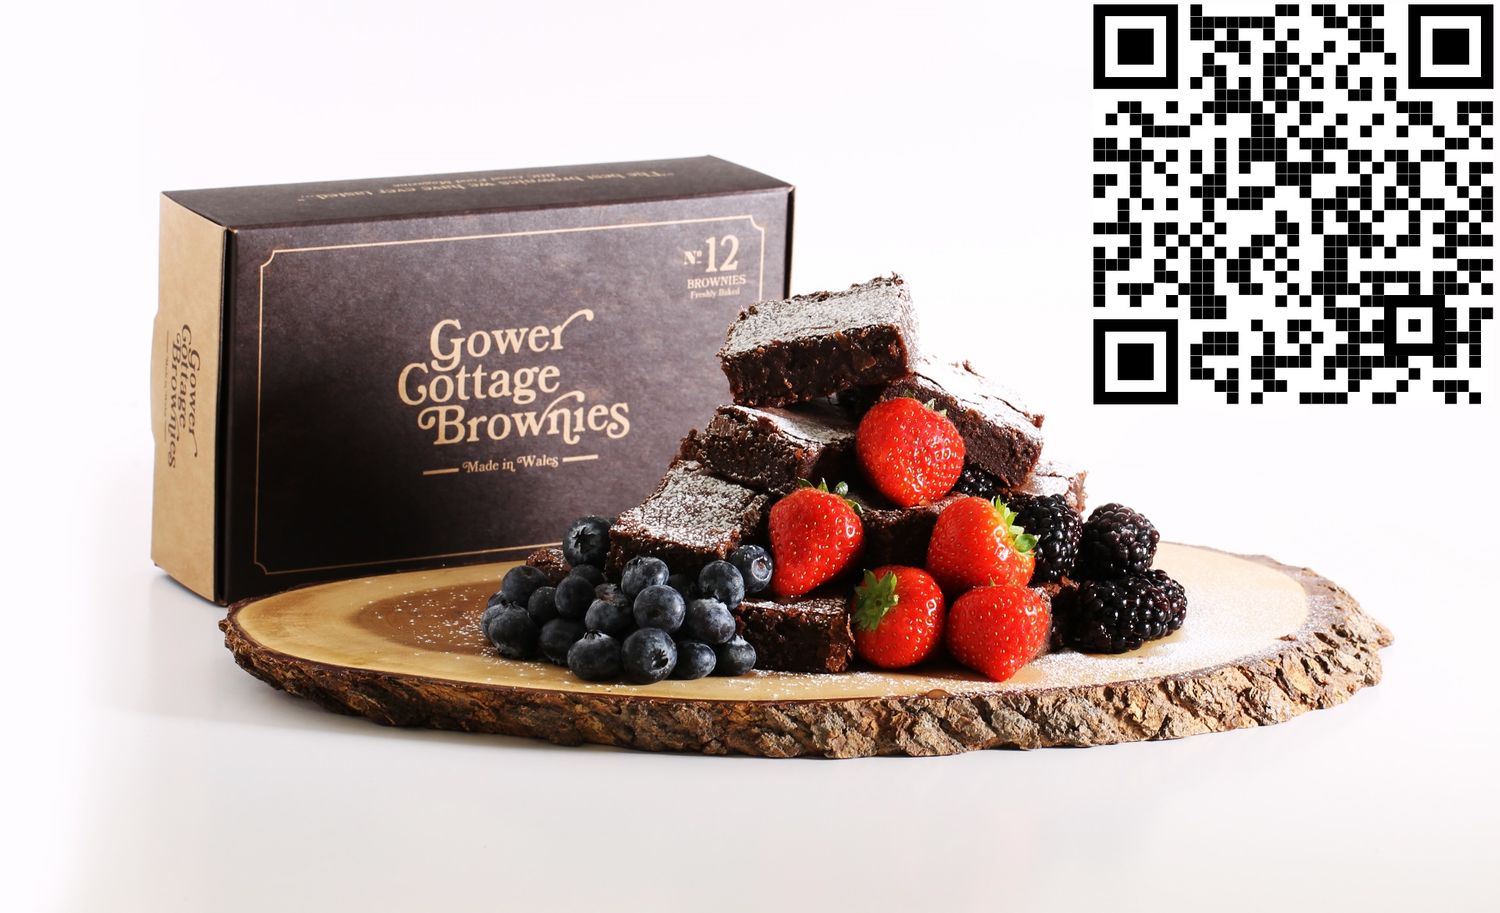 Gower Cottage Brownies